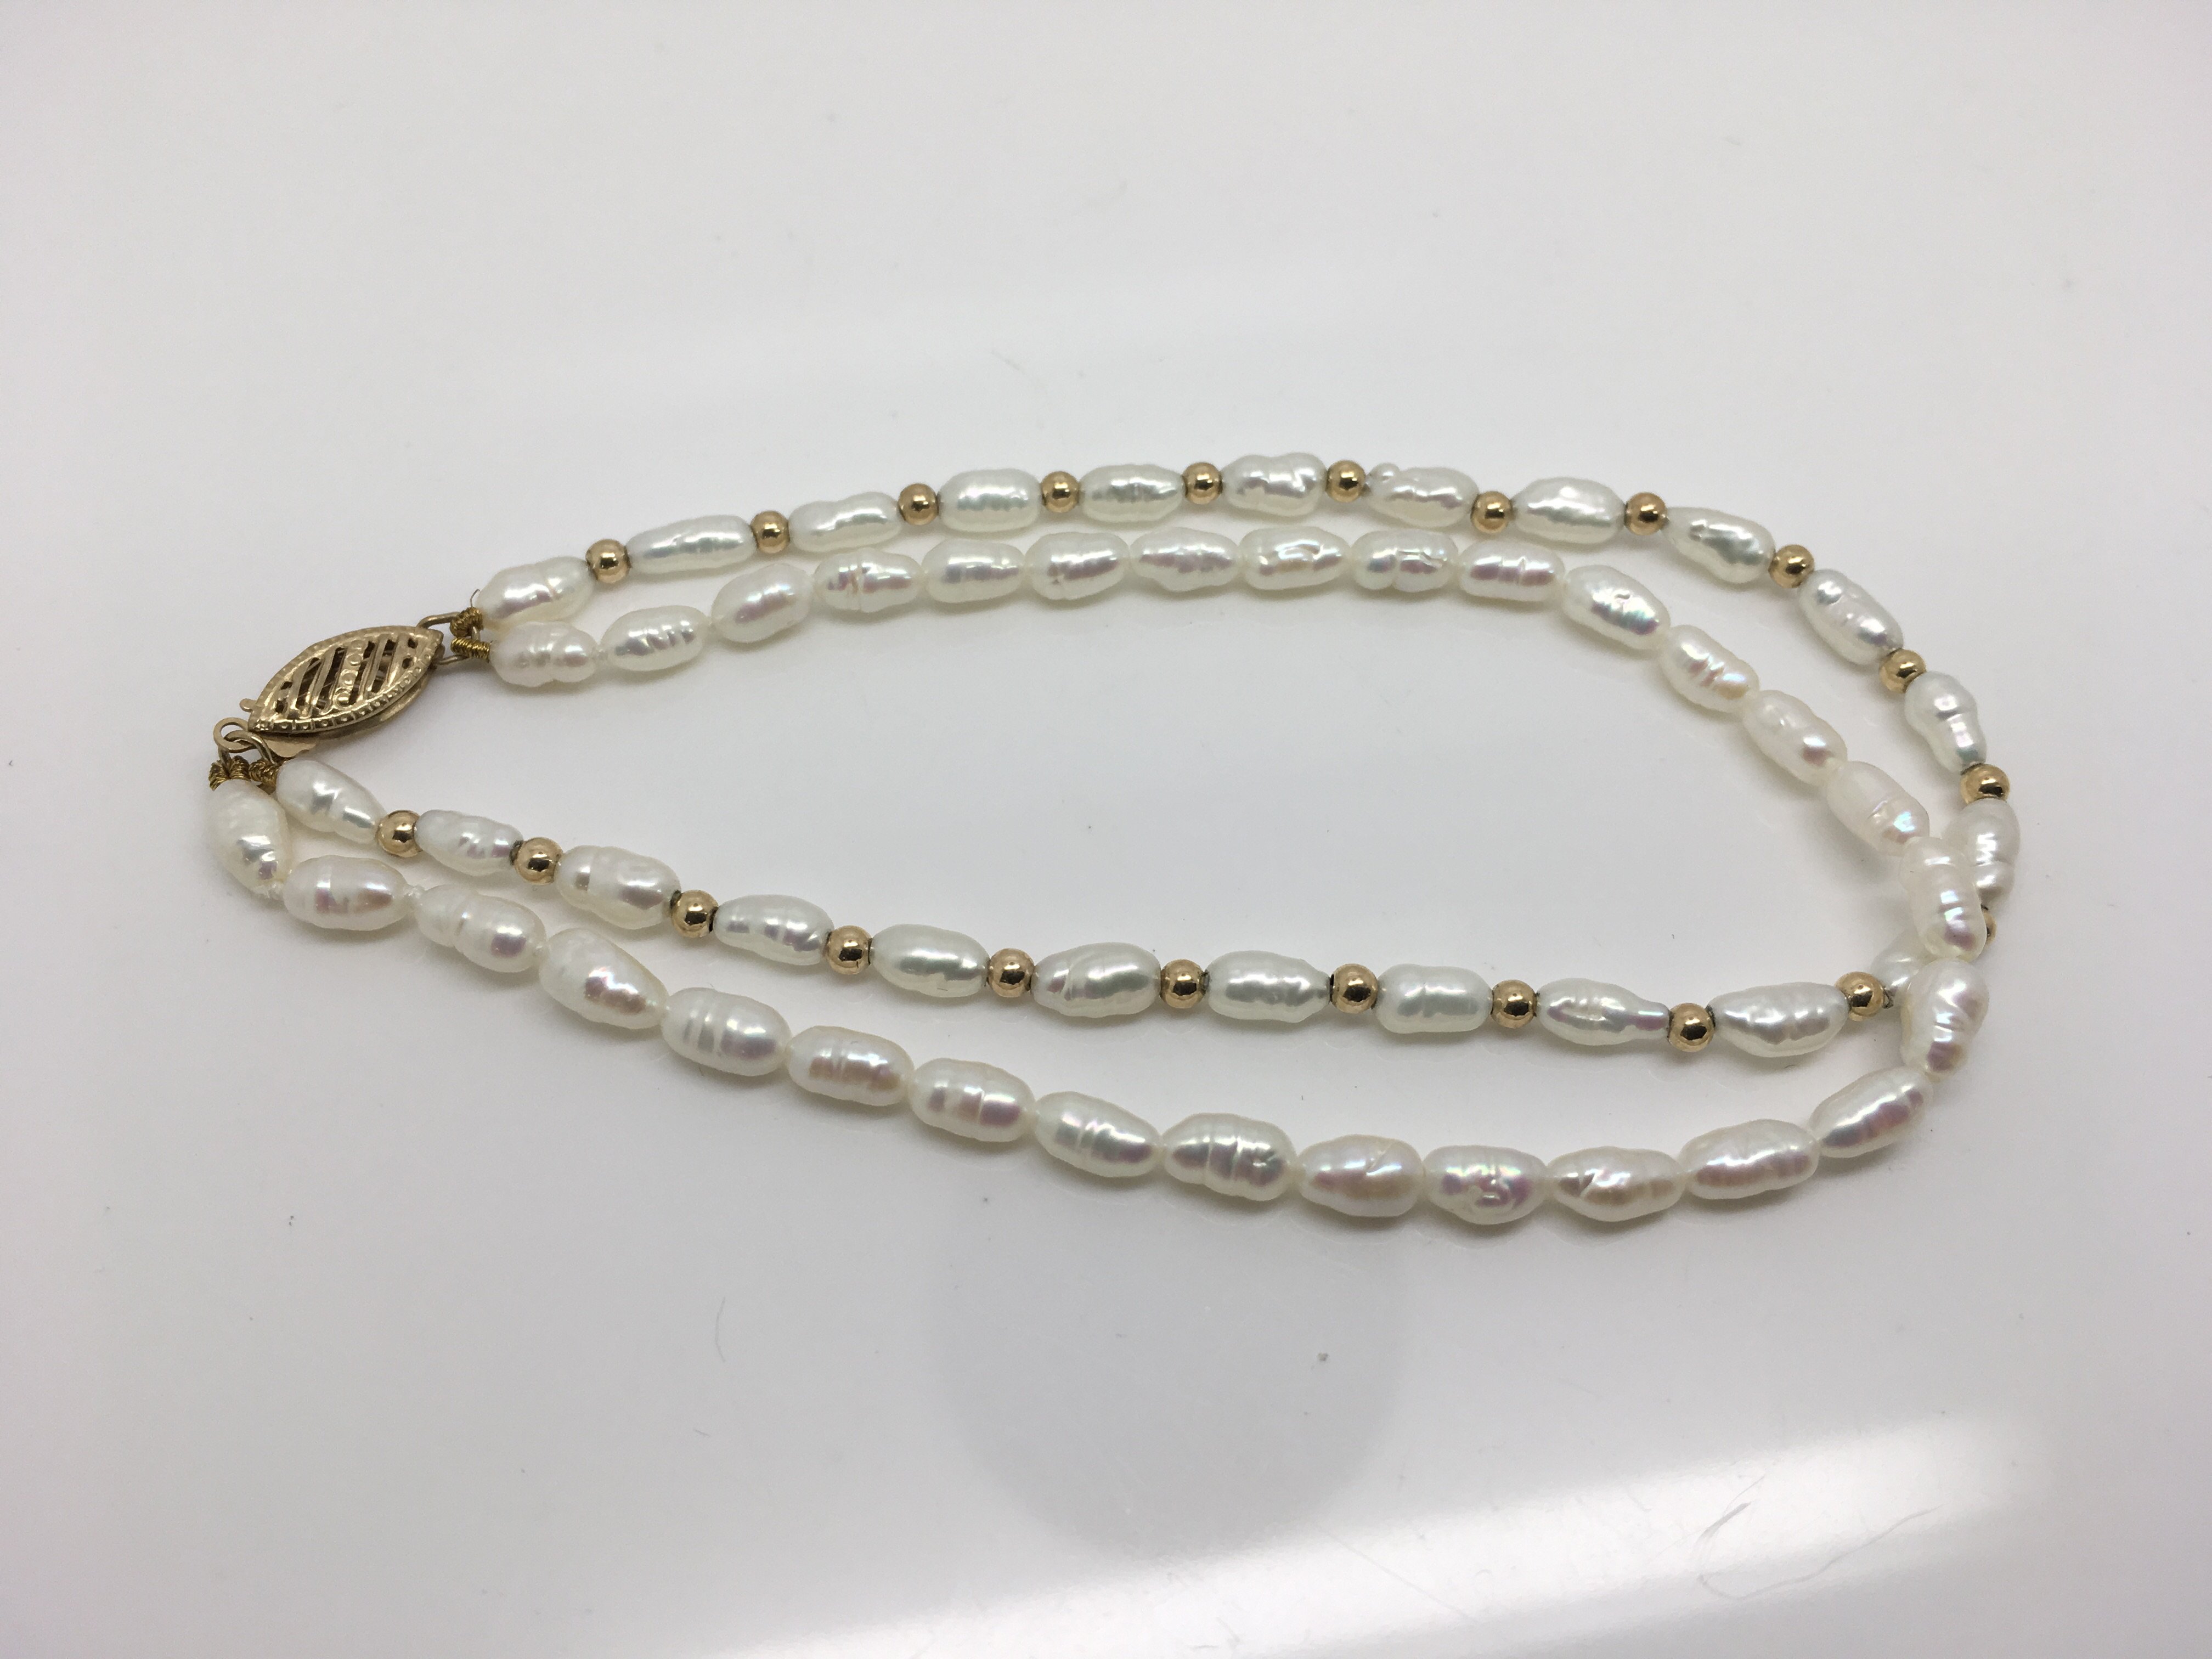 A 9ct gold bracelet with freshwater pearls. Weight approx 6.8g